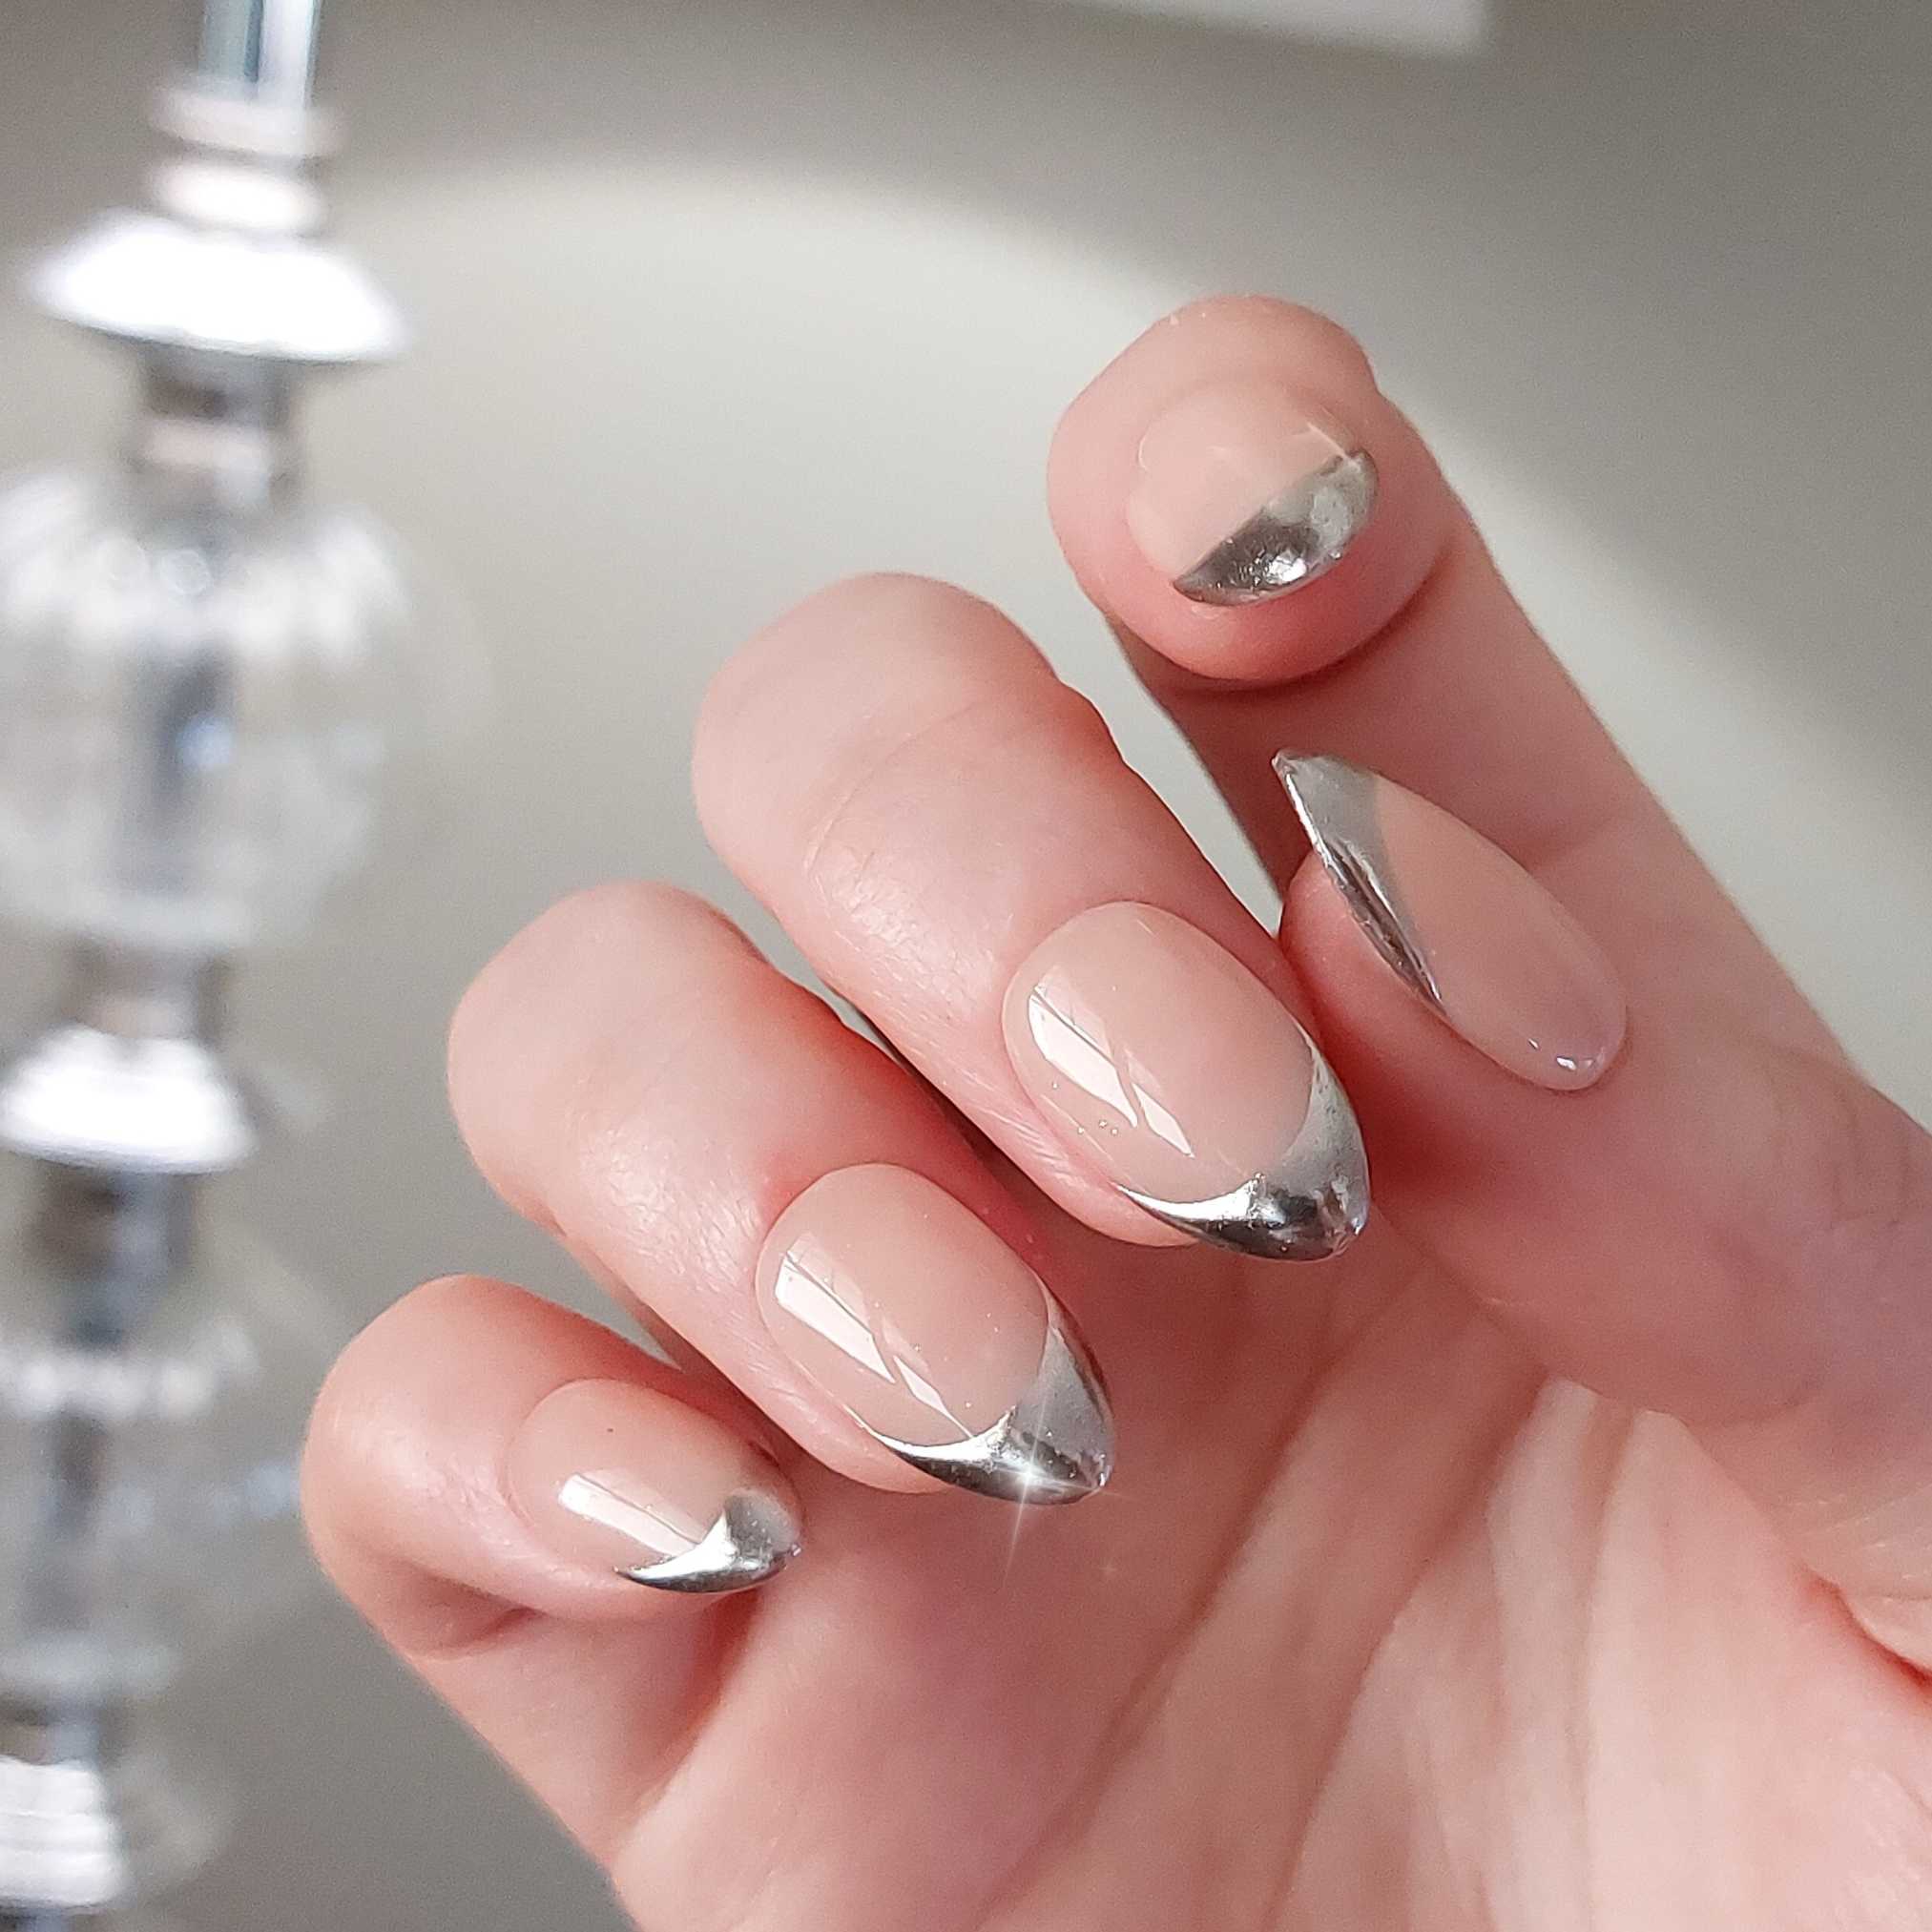 custom chrome tip french press on nails in short almond, chrome french reusable glue on nails, handmade nails by fancyb nails